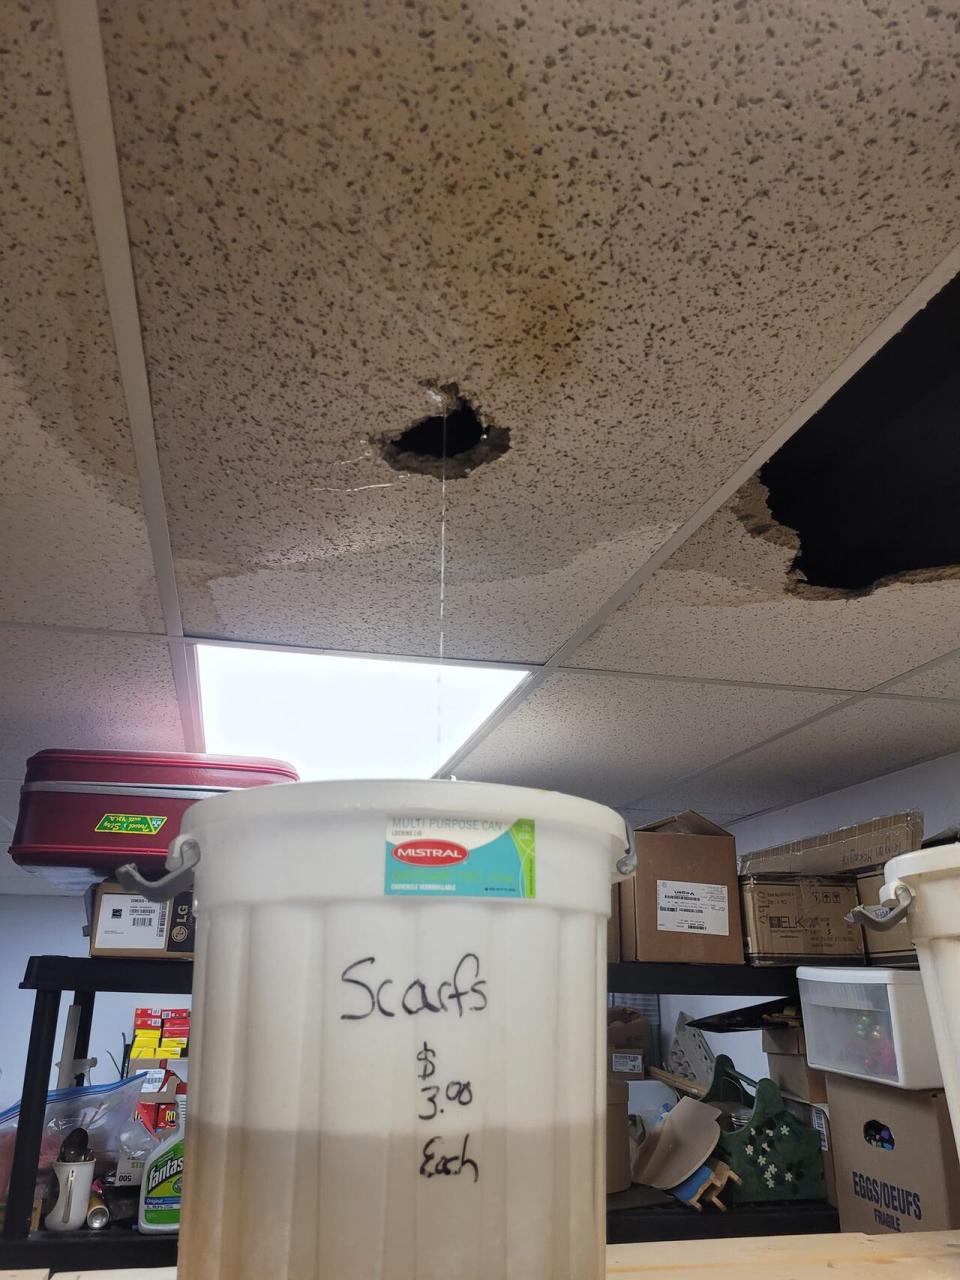 Heavy rain and a leaky roof combined Monday night to cause flooding at the Animal Auxillary Thrift Store in Vernon, B.C.